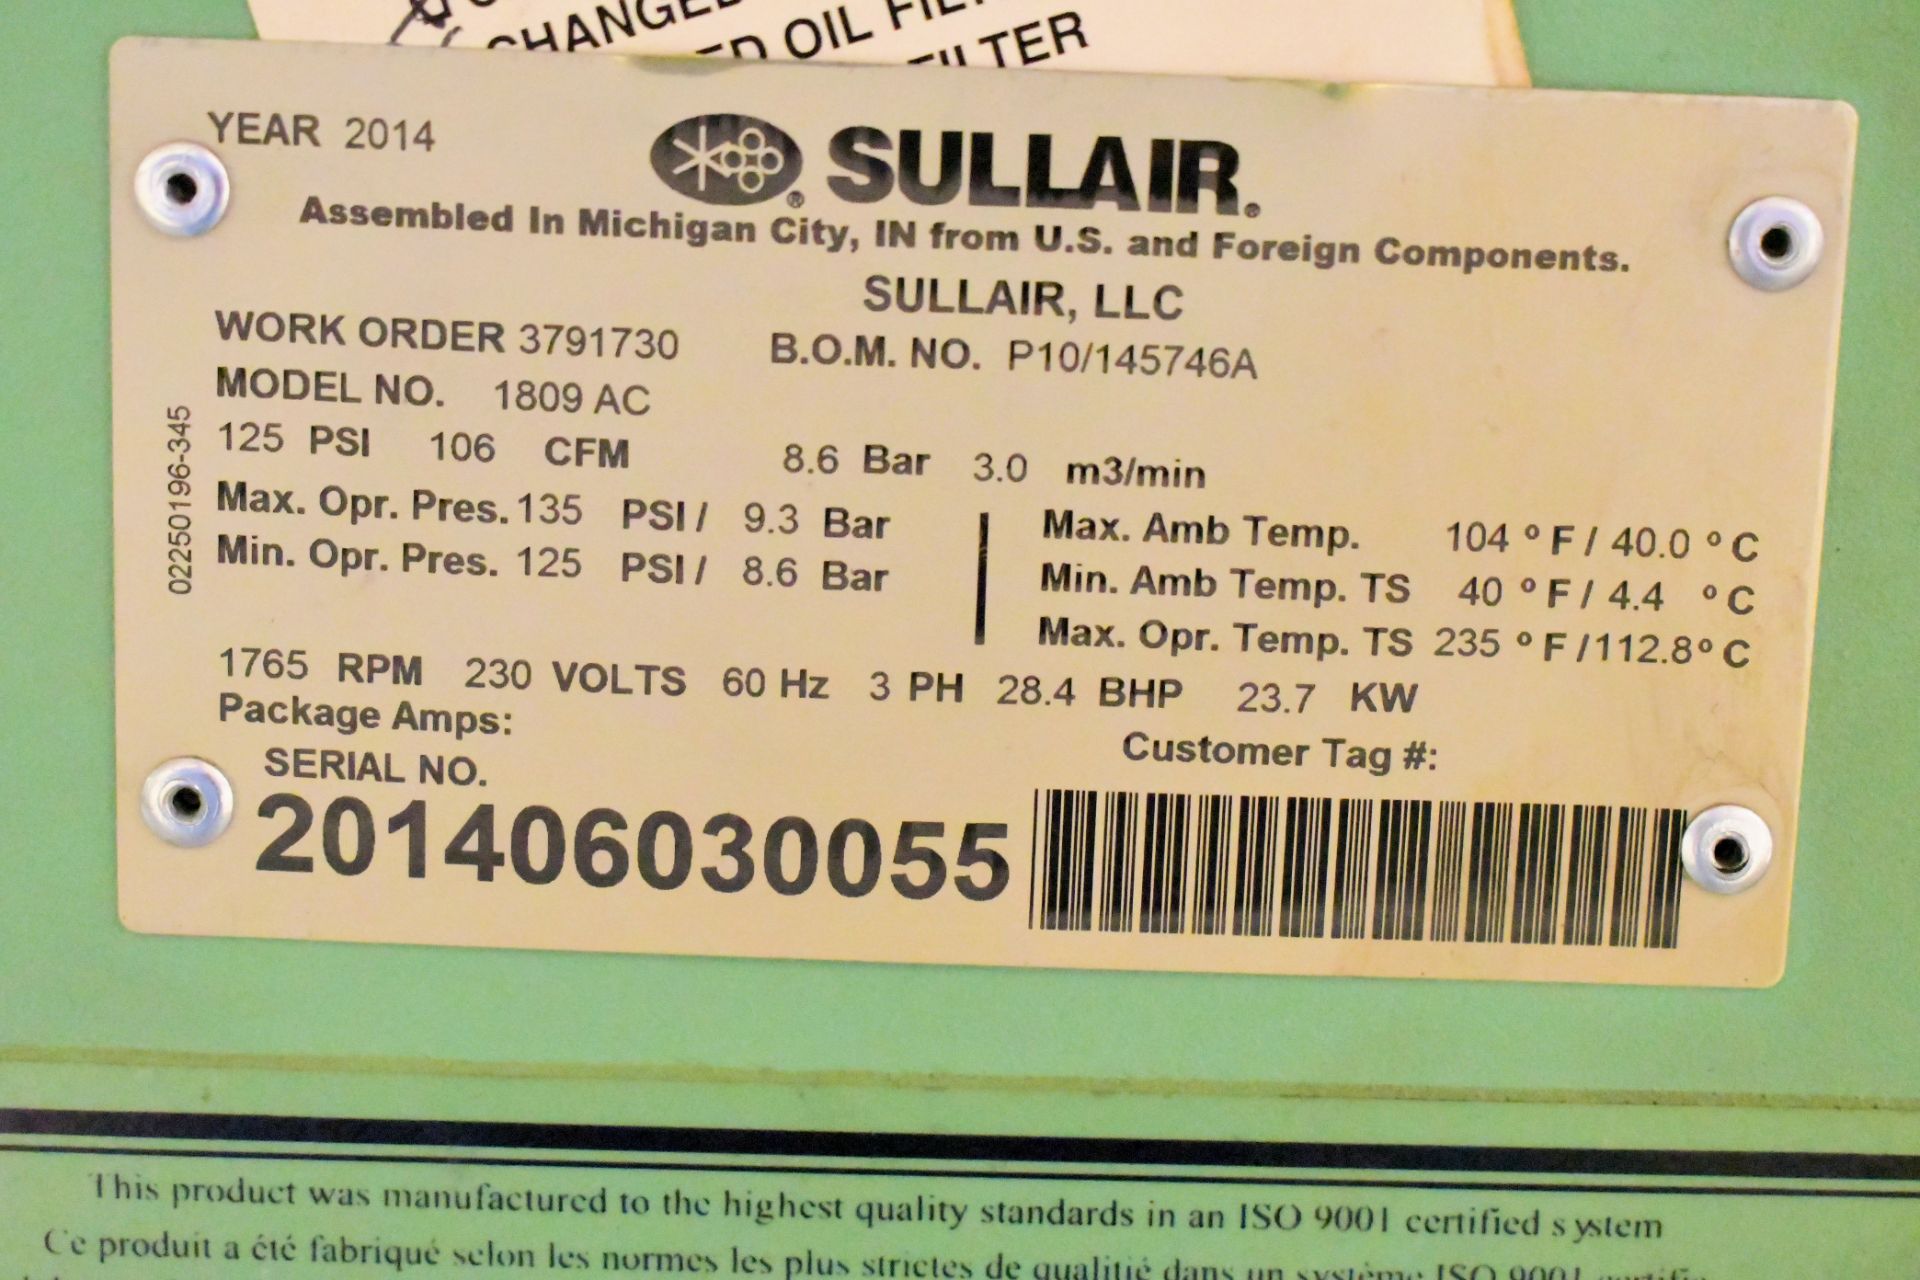 Sullair Model 1809 AC, 28.4 BHP, Rotary Screw Air Compressor, S/n 201406030055 (2014), (Upstairs - Image 3 of 3